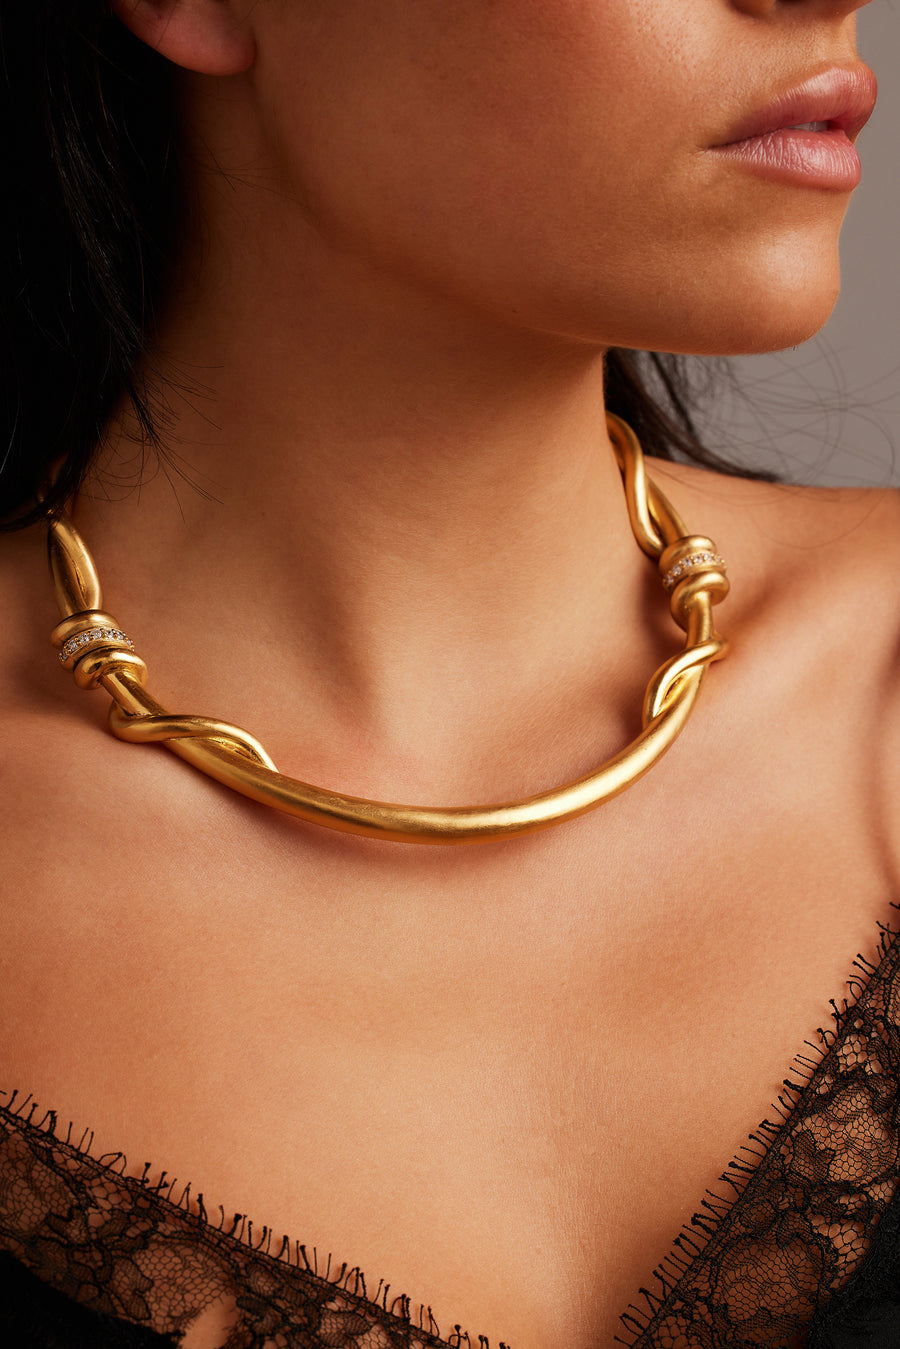 A model wearing the Devotion Collar in gold.